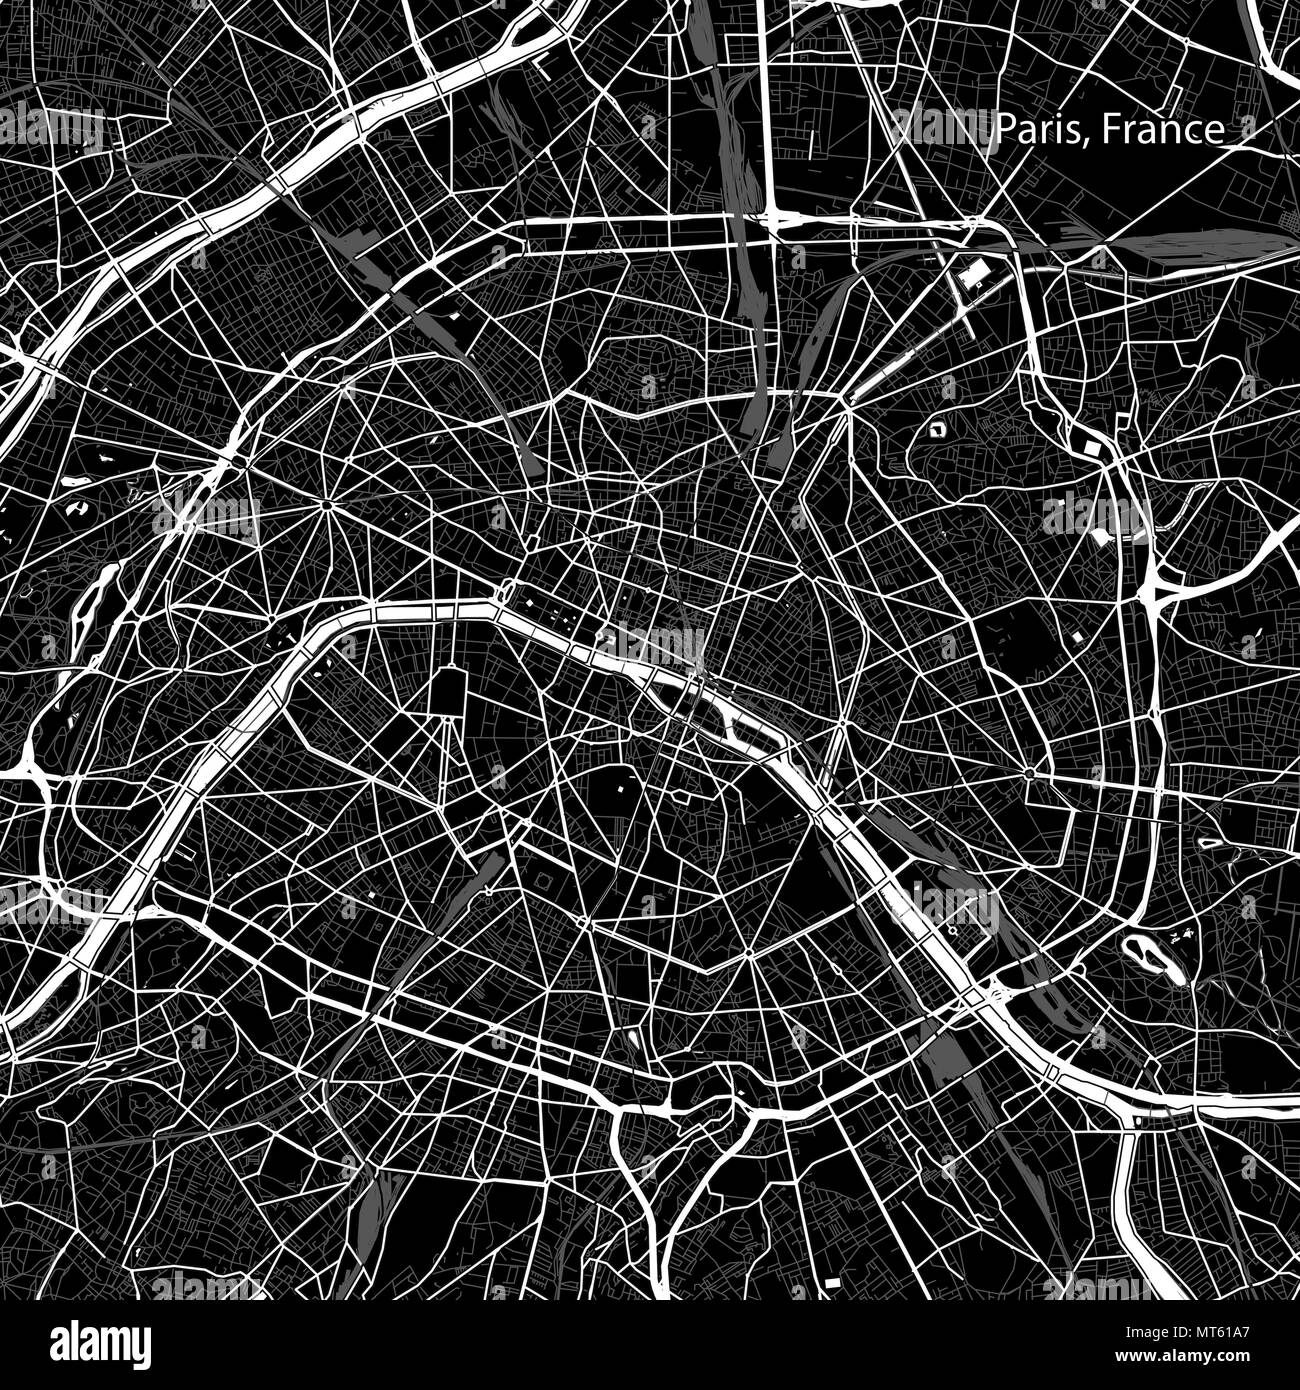 Area map of Paris, France. Dark background version for infographic and marketing projects. This map of Paris, contains typical landmarks with streets, Stock Vector